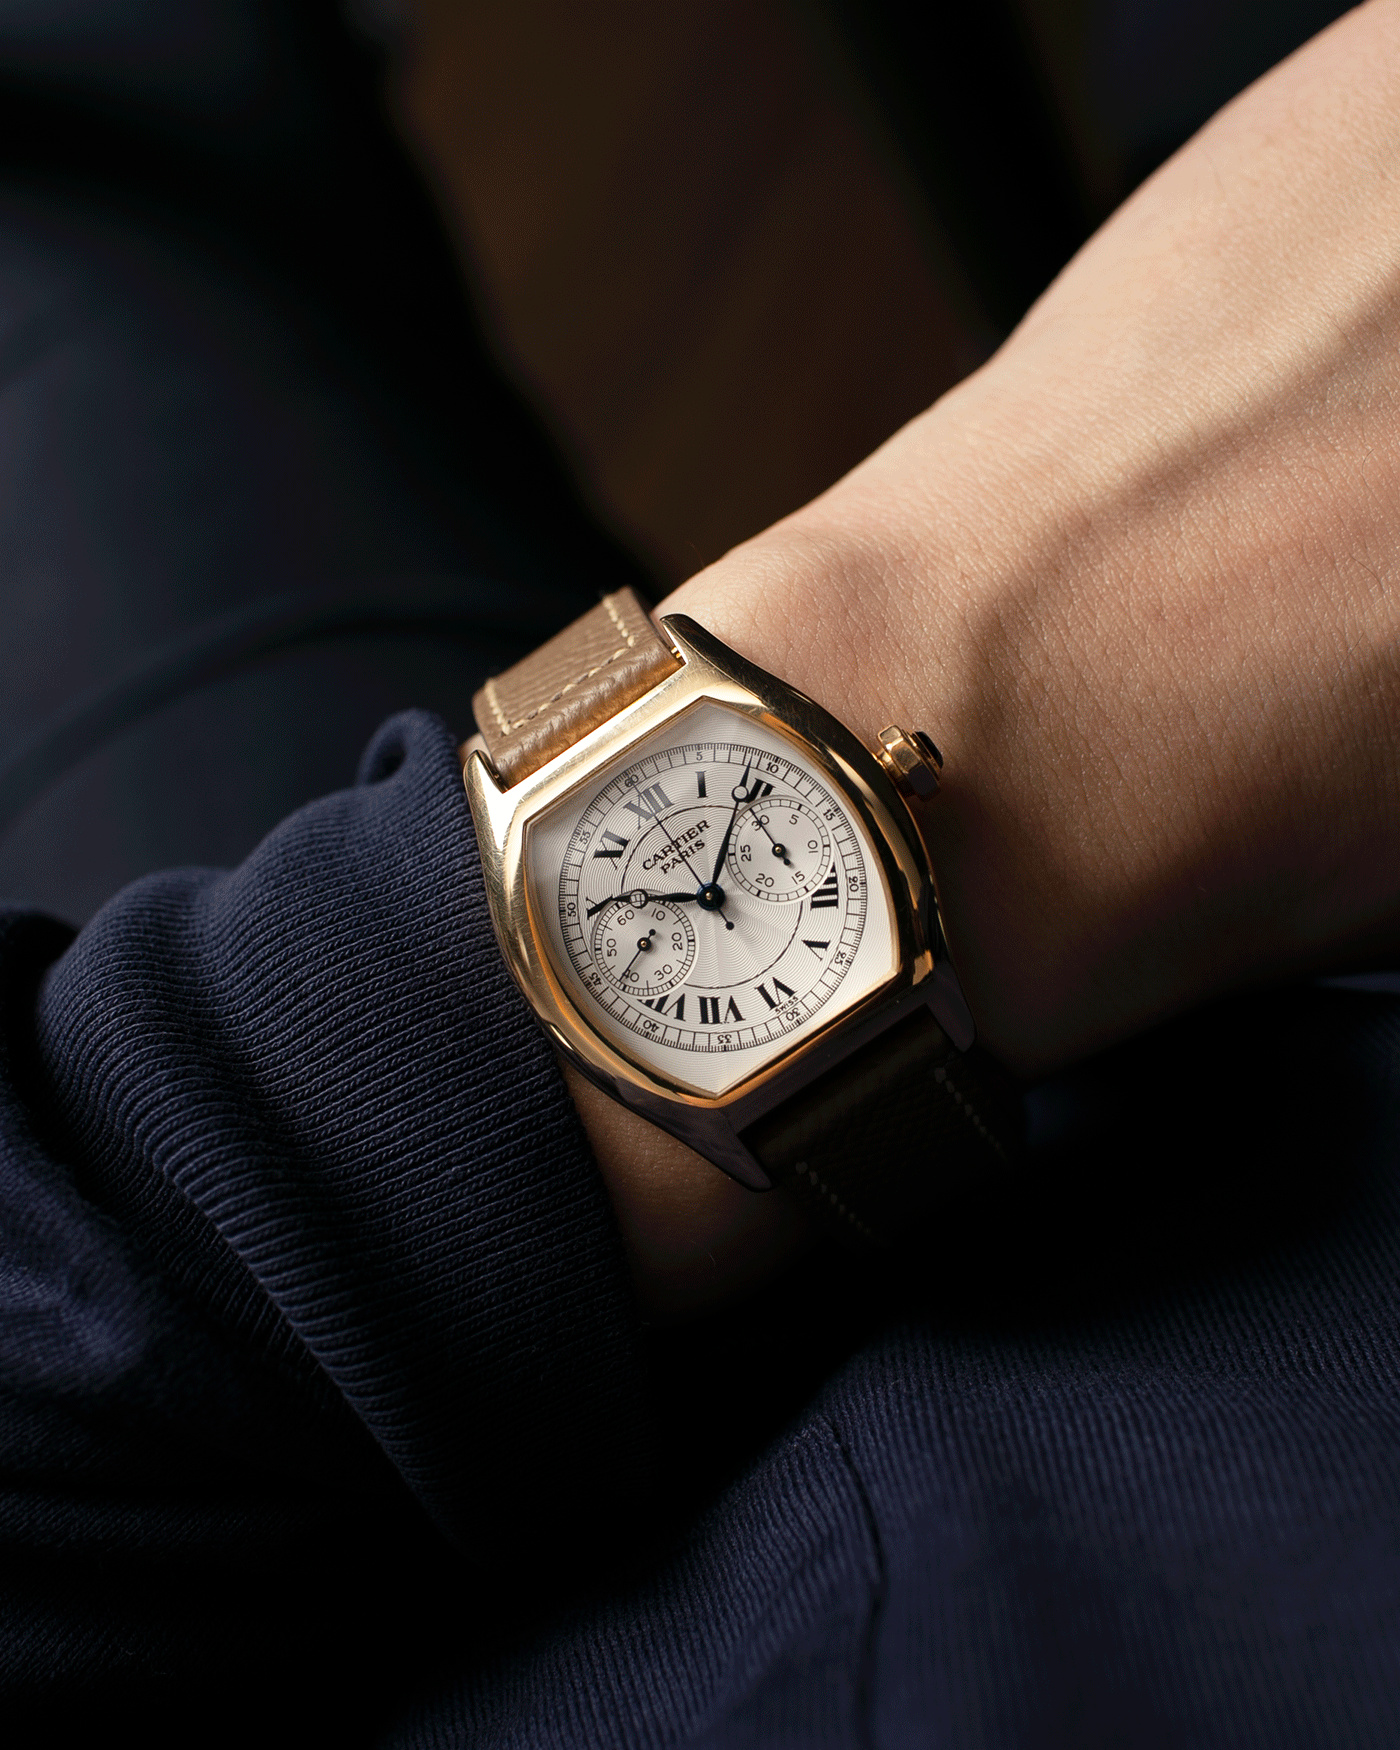 Brand: Cartier Year: 2000’s Model: CPCP Collection Prive Tortue Monopoussoir Reference: 2356E Material: 18k Yellow Gold Movement: THA Cal. 045MC Case Diameter: 43 x 35 mm Strap: Cartier Nostime Taupe Grained Calf with 18k Cartier Yellow Gold Deployant F.P. Journe